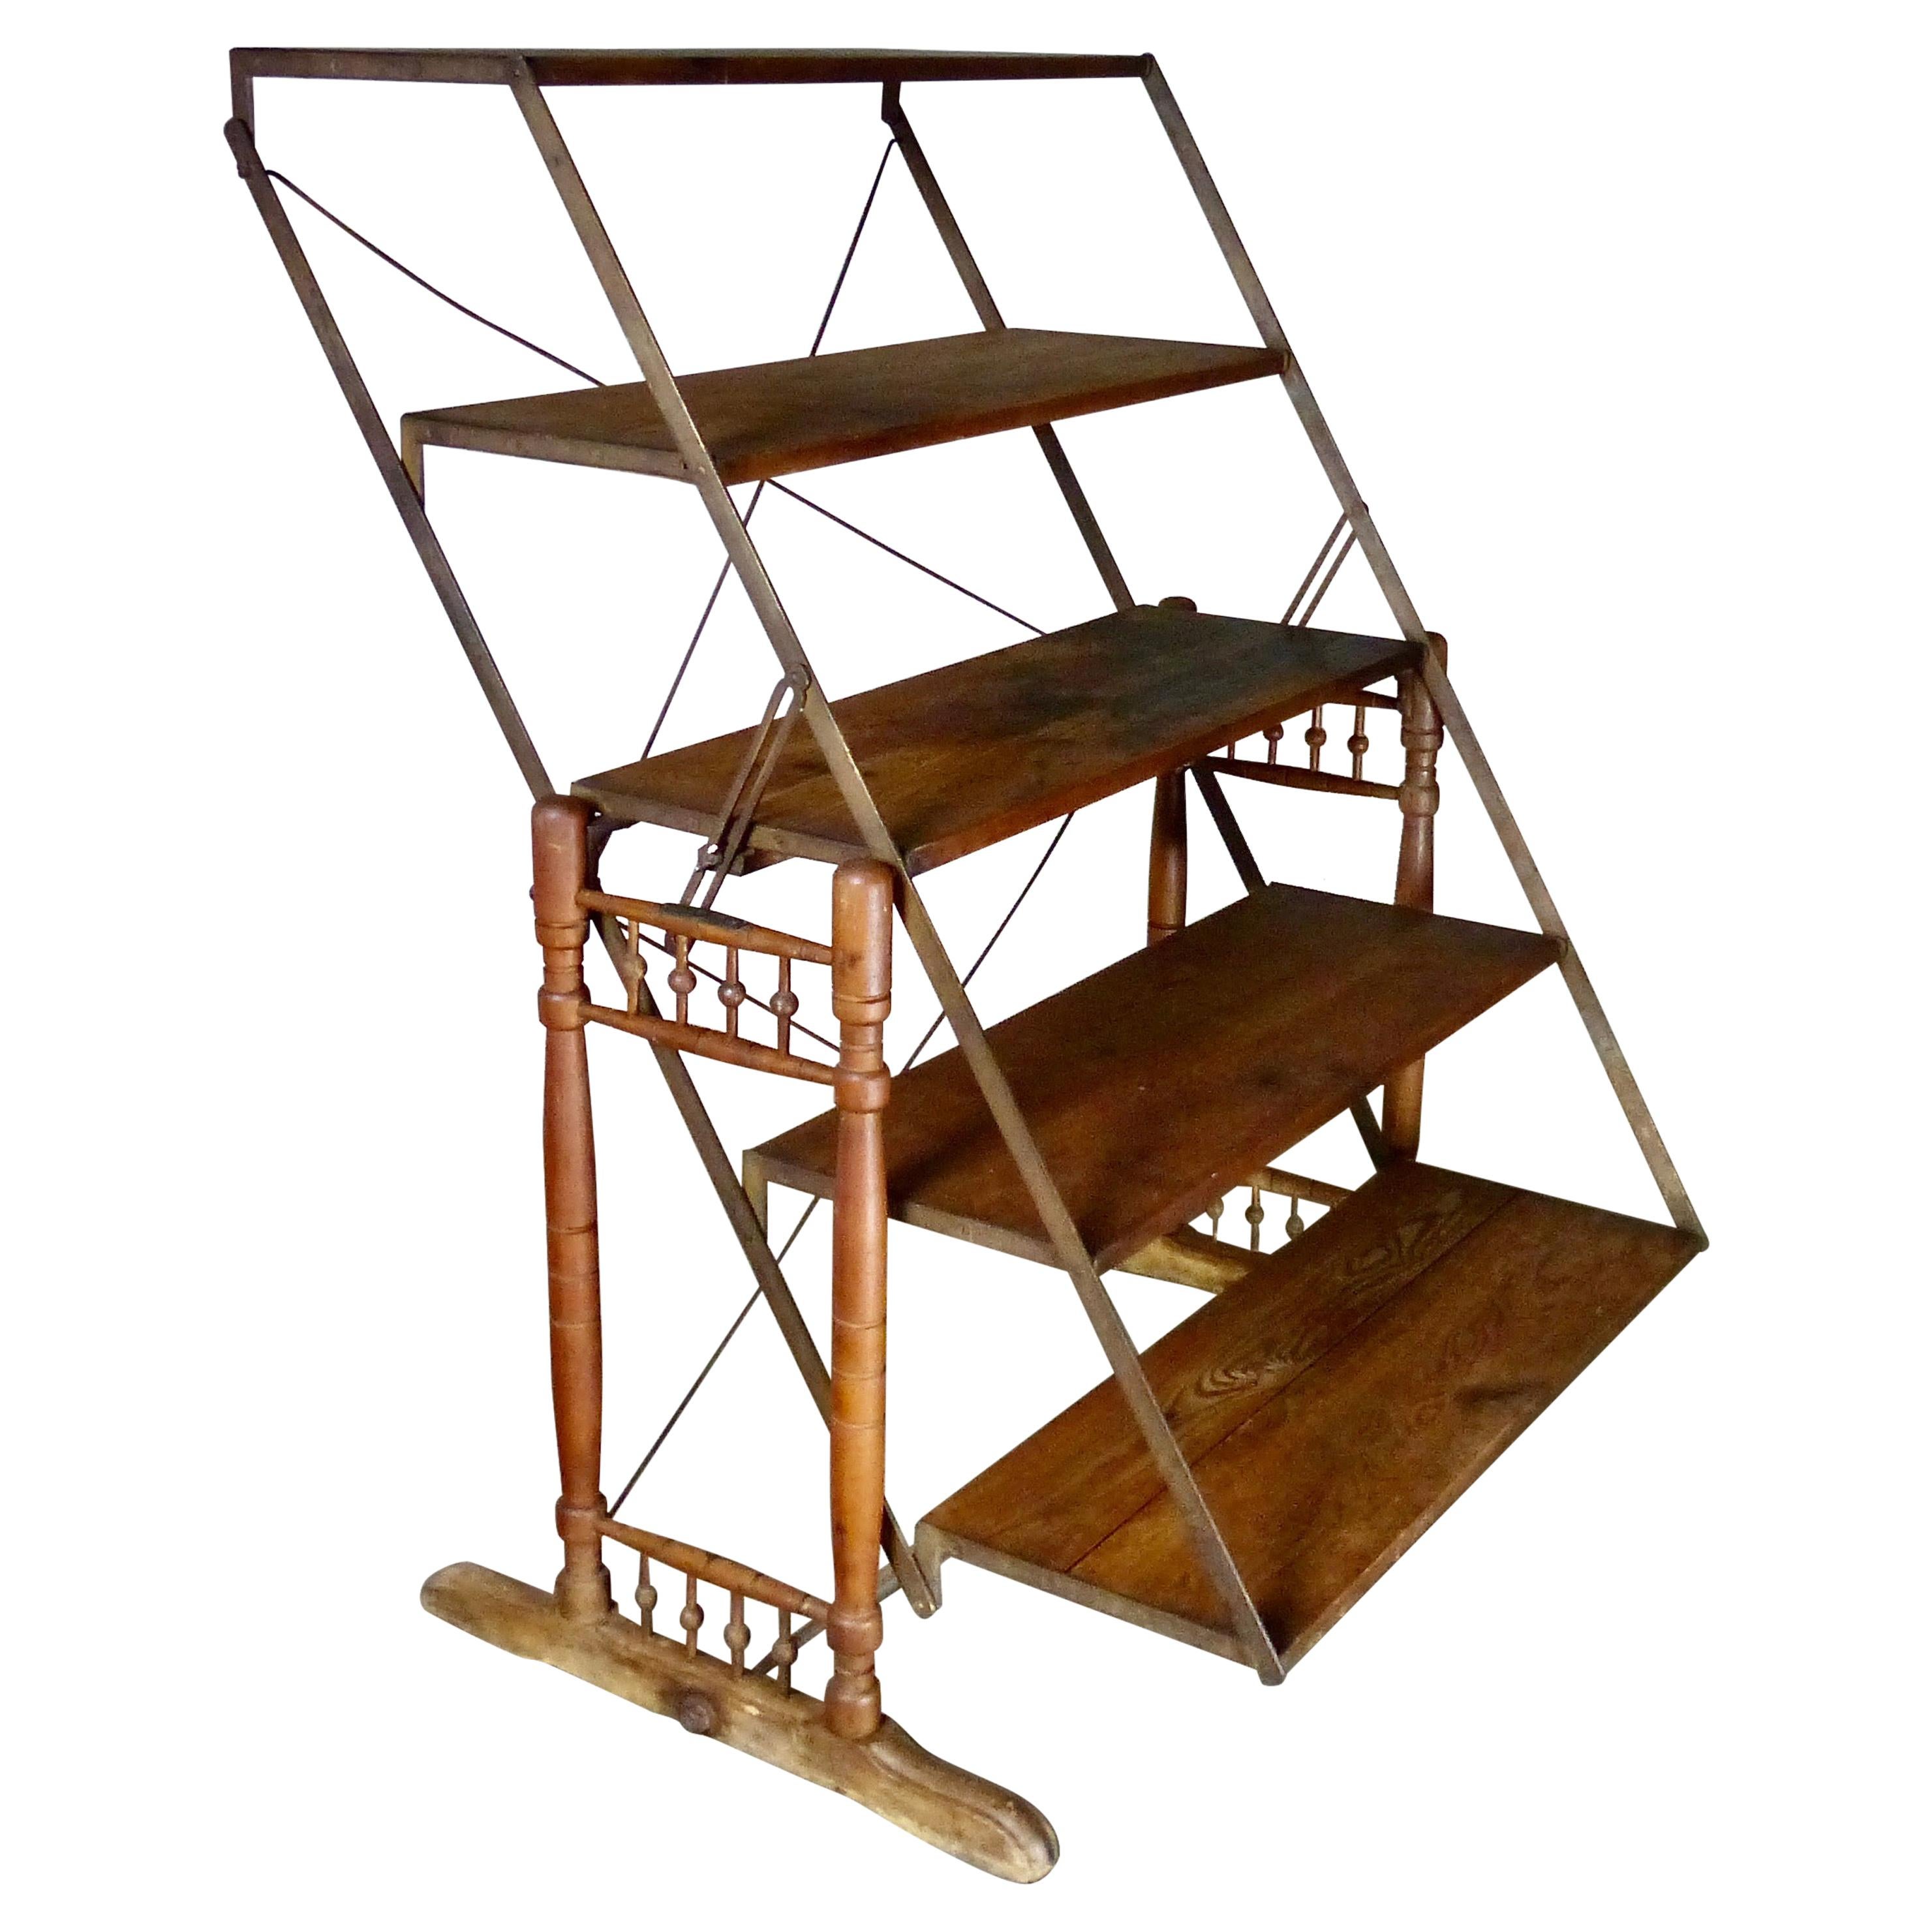 Multi-Position Folding Shelf/Table by The Combination Table Co., circa 1900